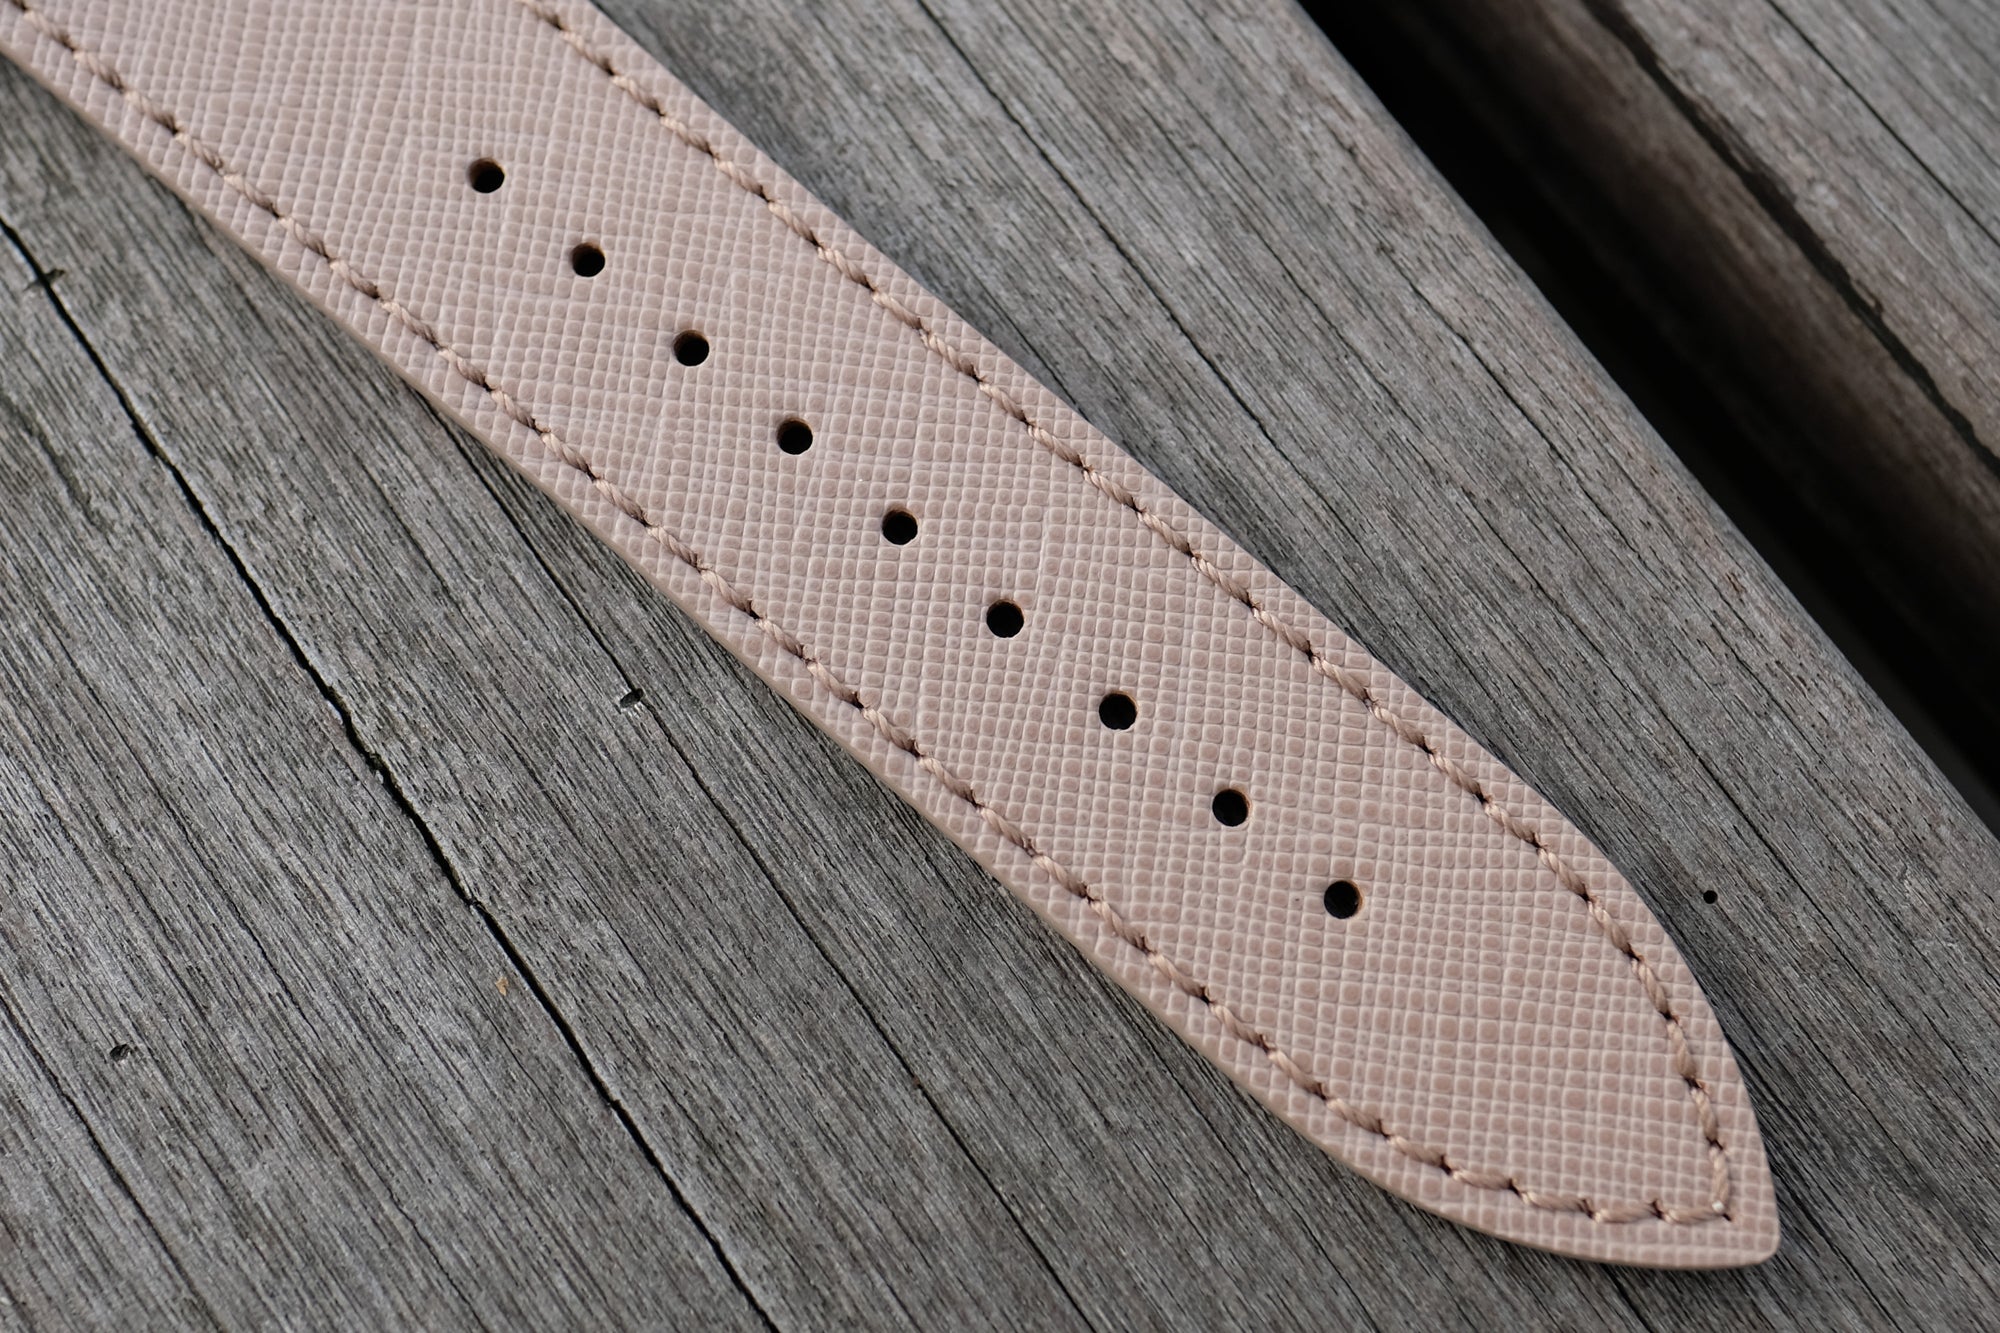 Pin and Buckle Apple Watch Bands - Saffiano - Textured Leather Apple Watch Bands - Texture - Taupe